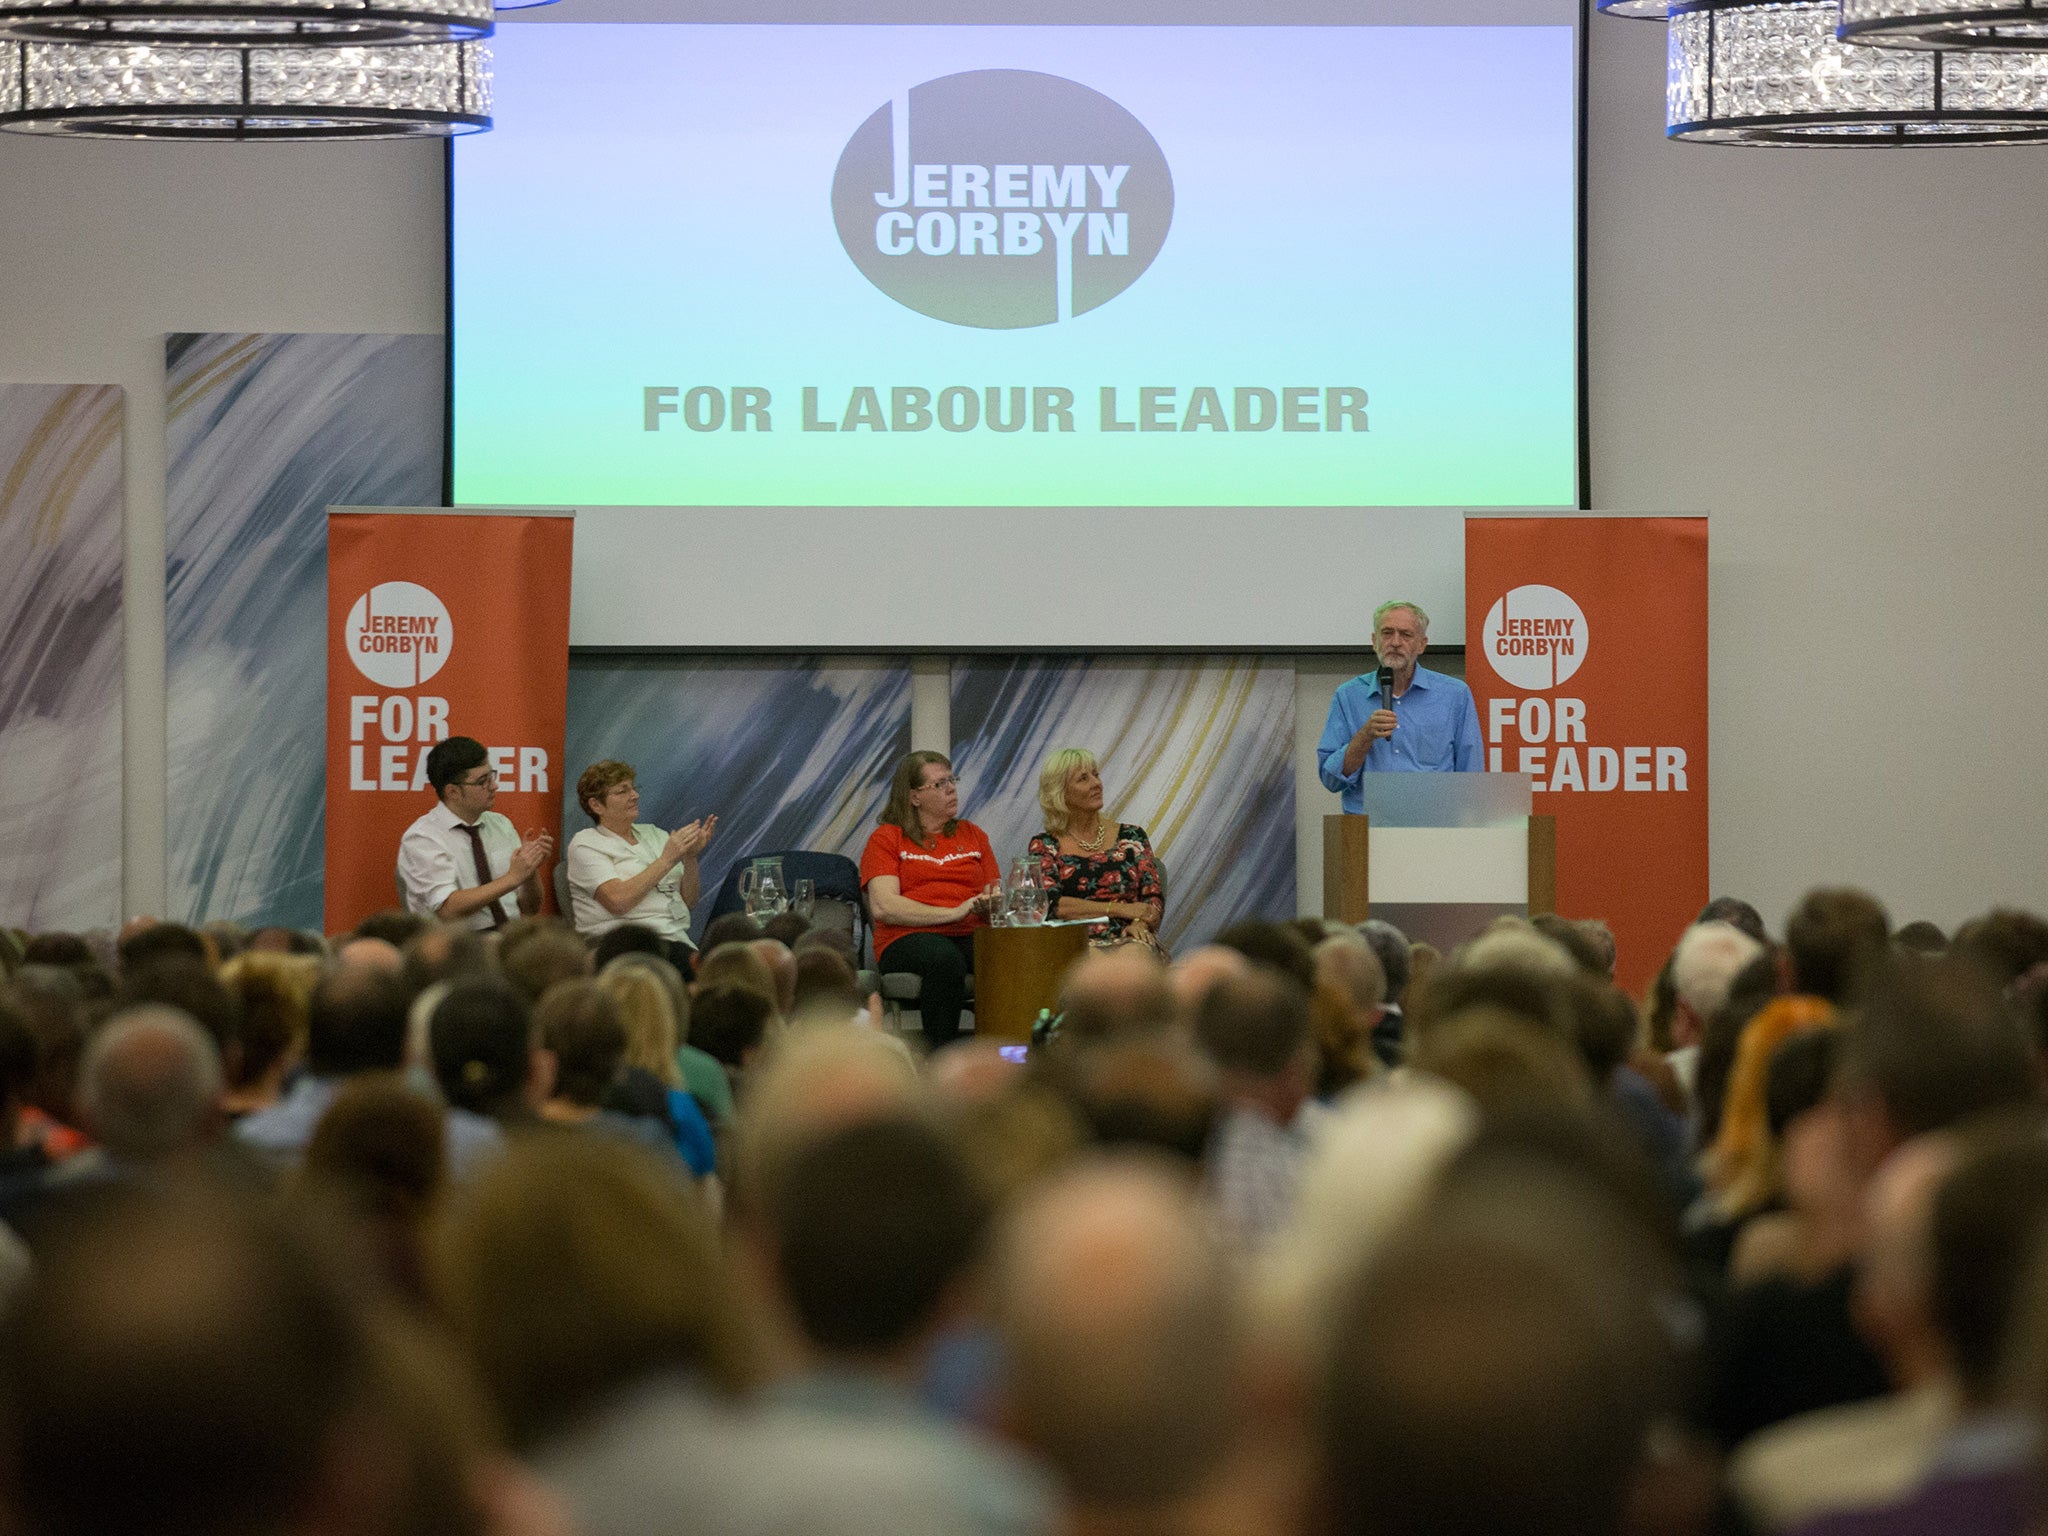 Jeremy Corbyn speaks at a rally for supporters at the Hilton at the Ageas Bowl on August 25, 2015